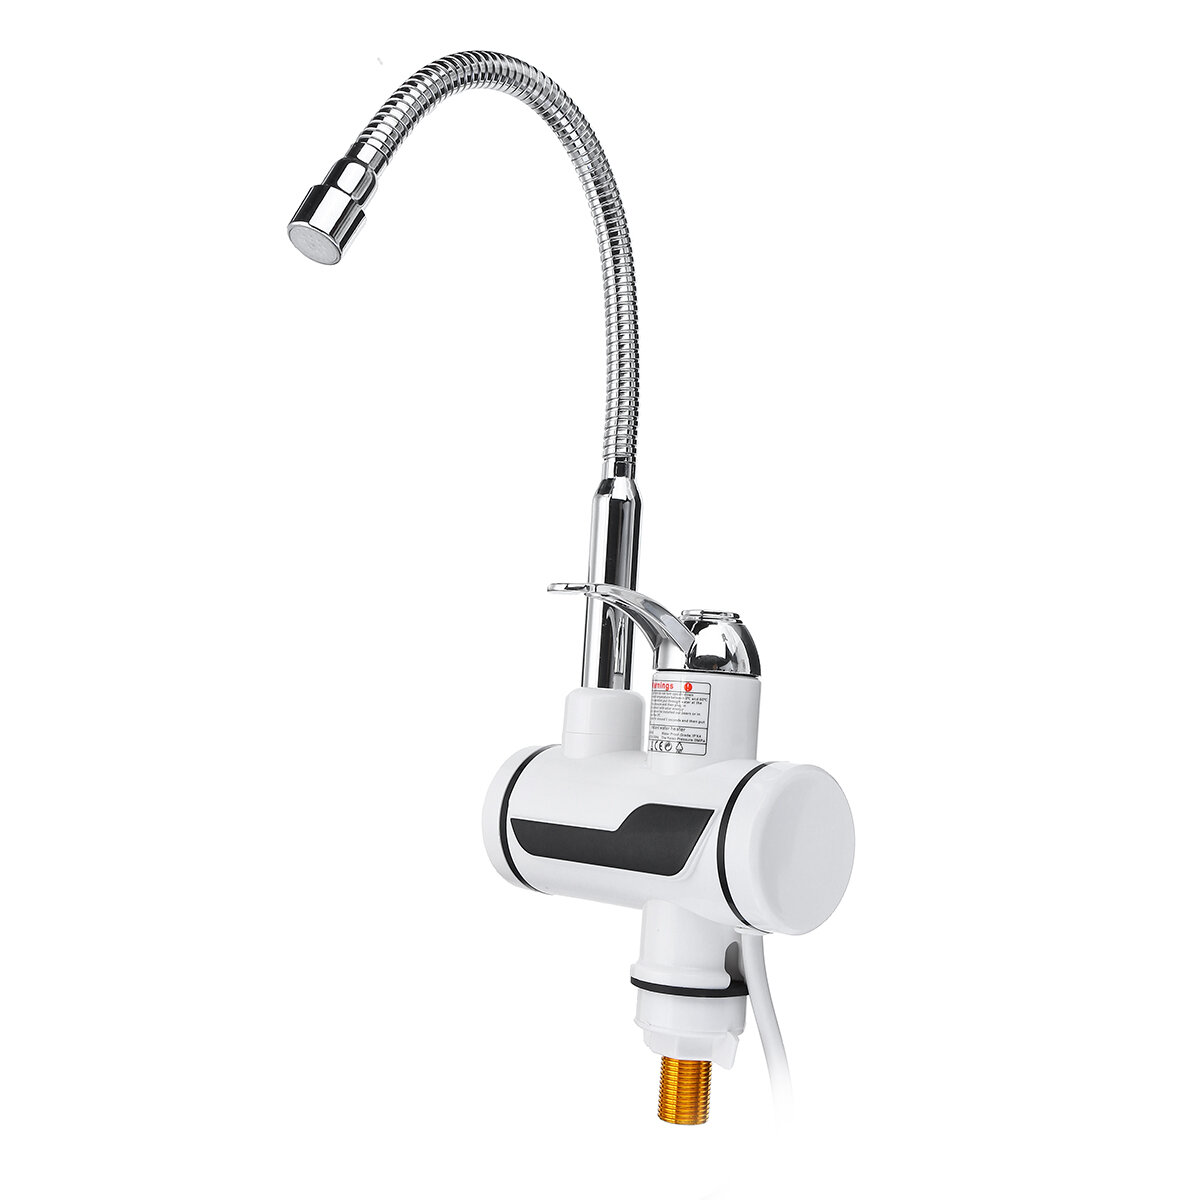 best price,220v,3000w,instant,water,heater,faucet,eu,discount